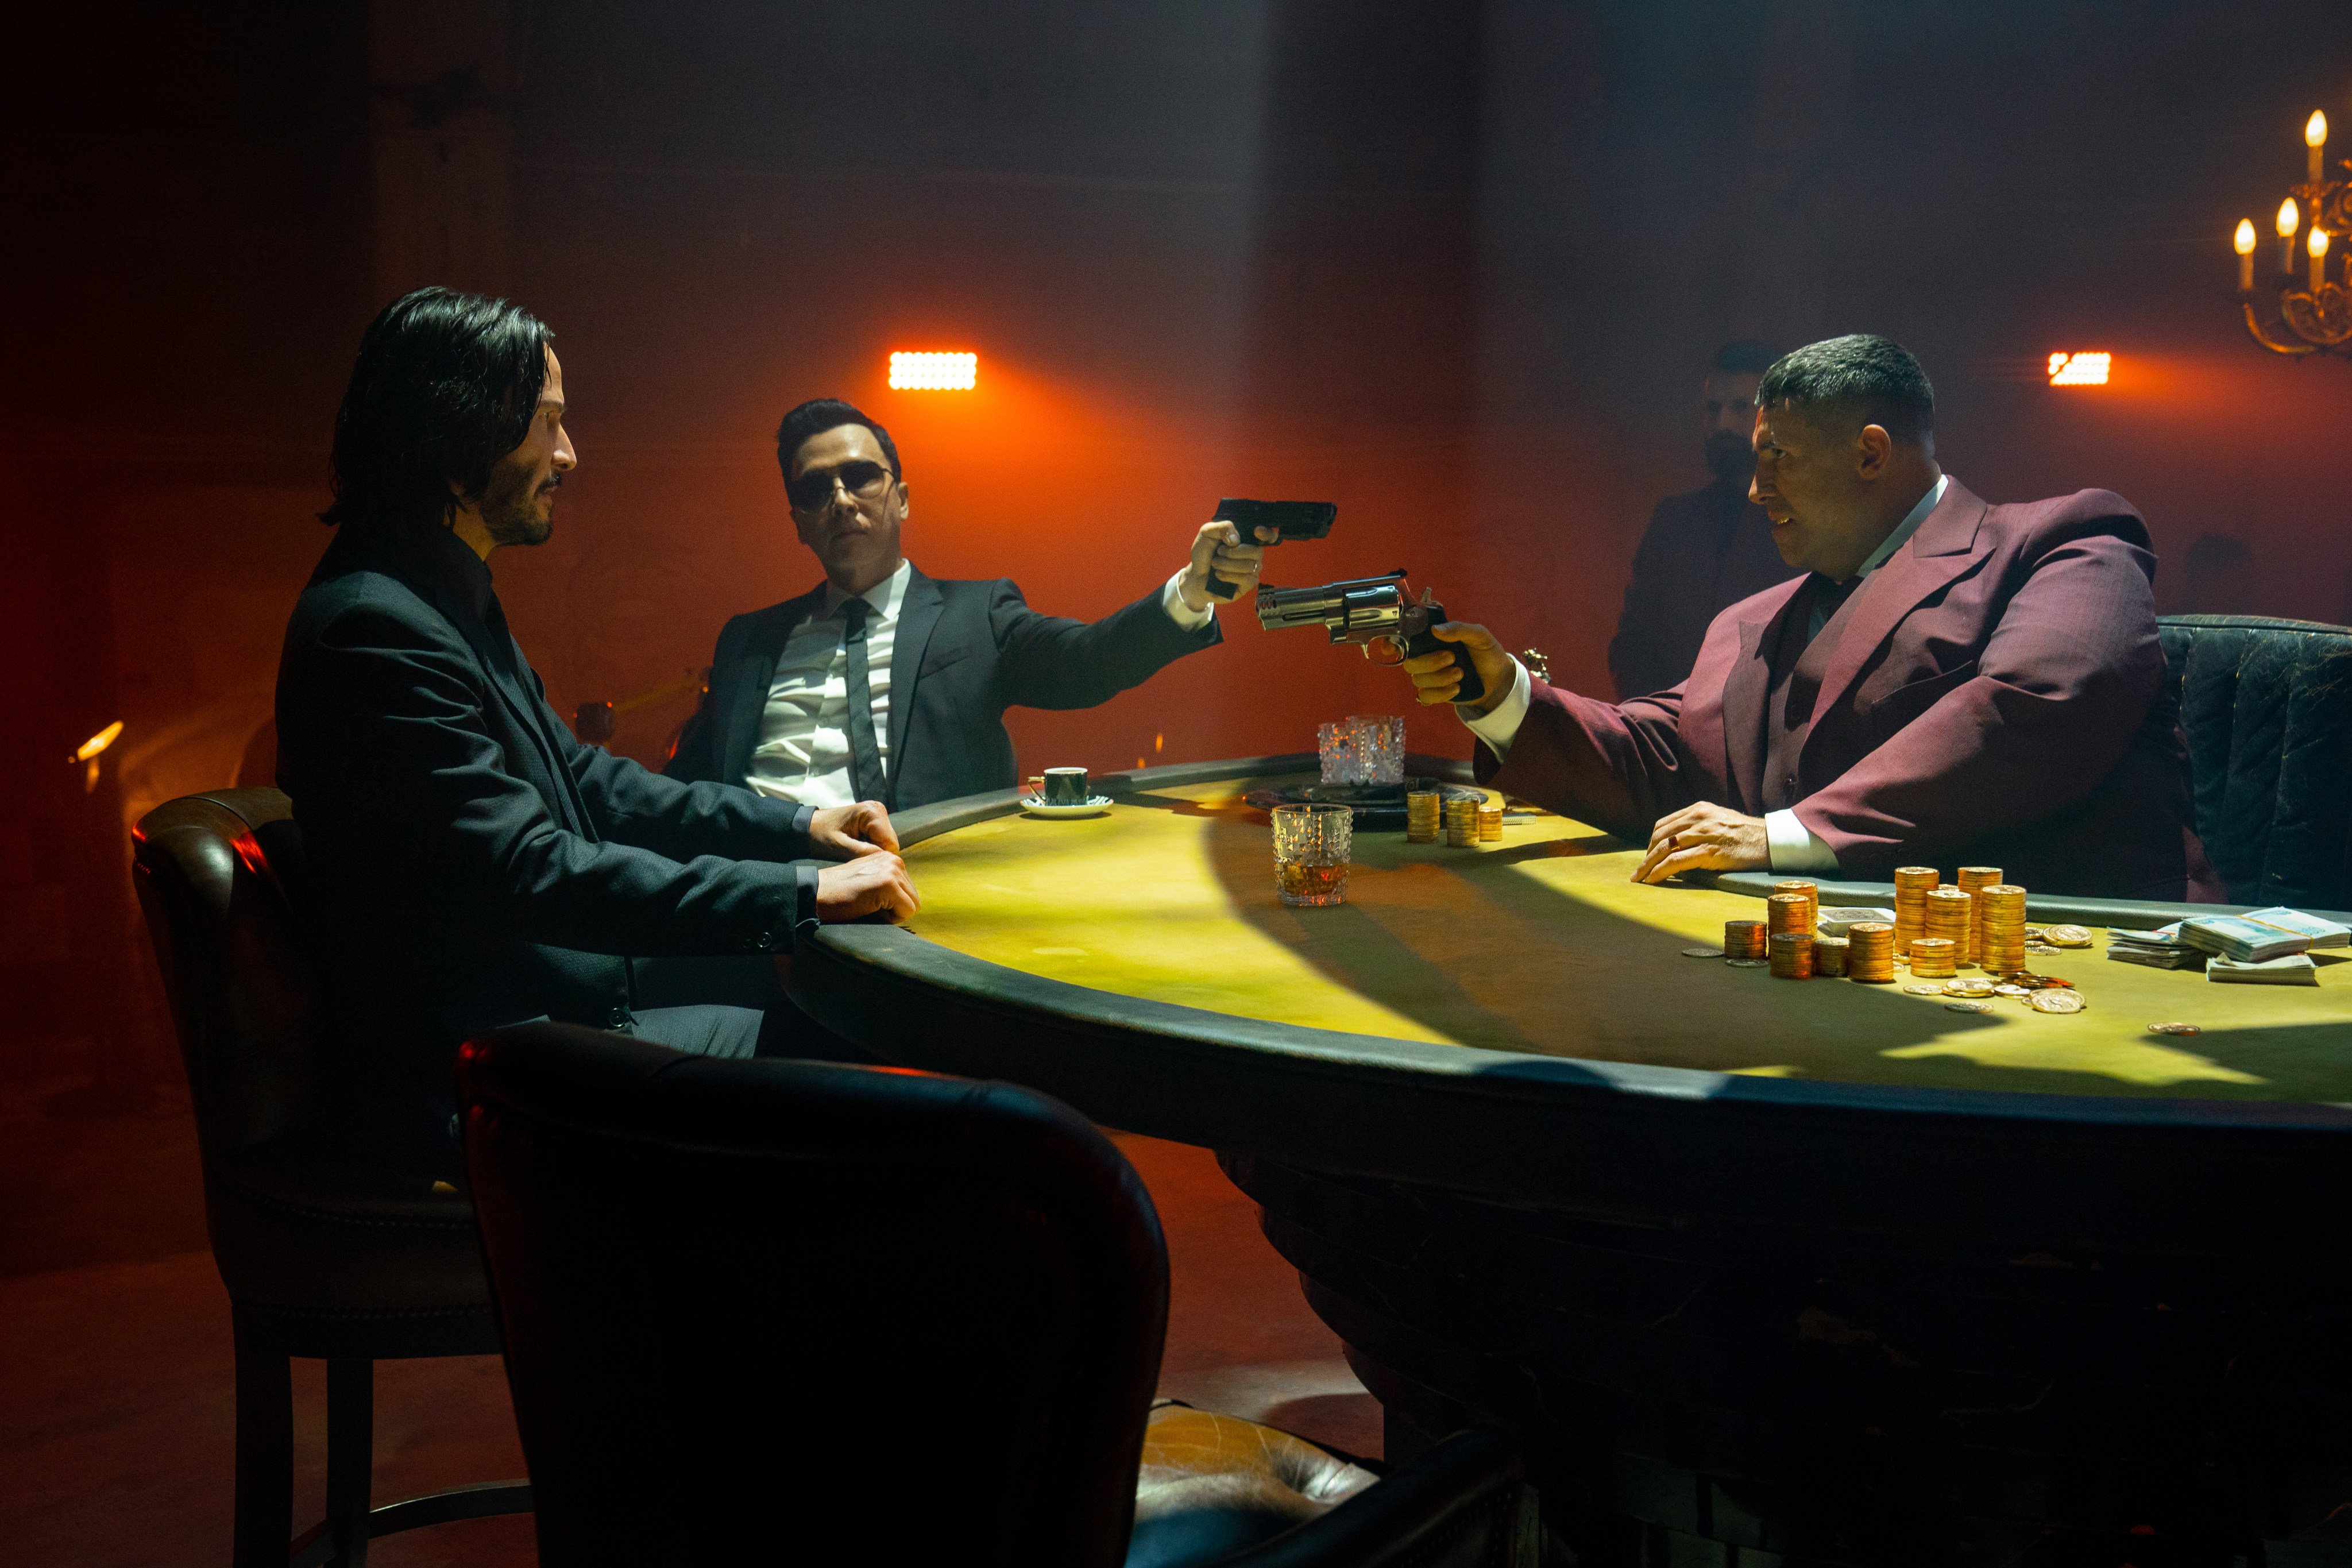 (From left) Keanu Reeves as John Wick, Donnie Yen as Caine, and Scott Adkins as Killa in a still from John Wick: Chapter 4. Photo: Murray Close/Lionsgate.